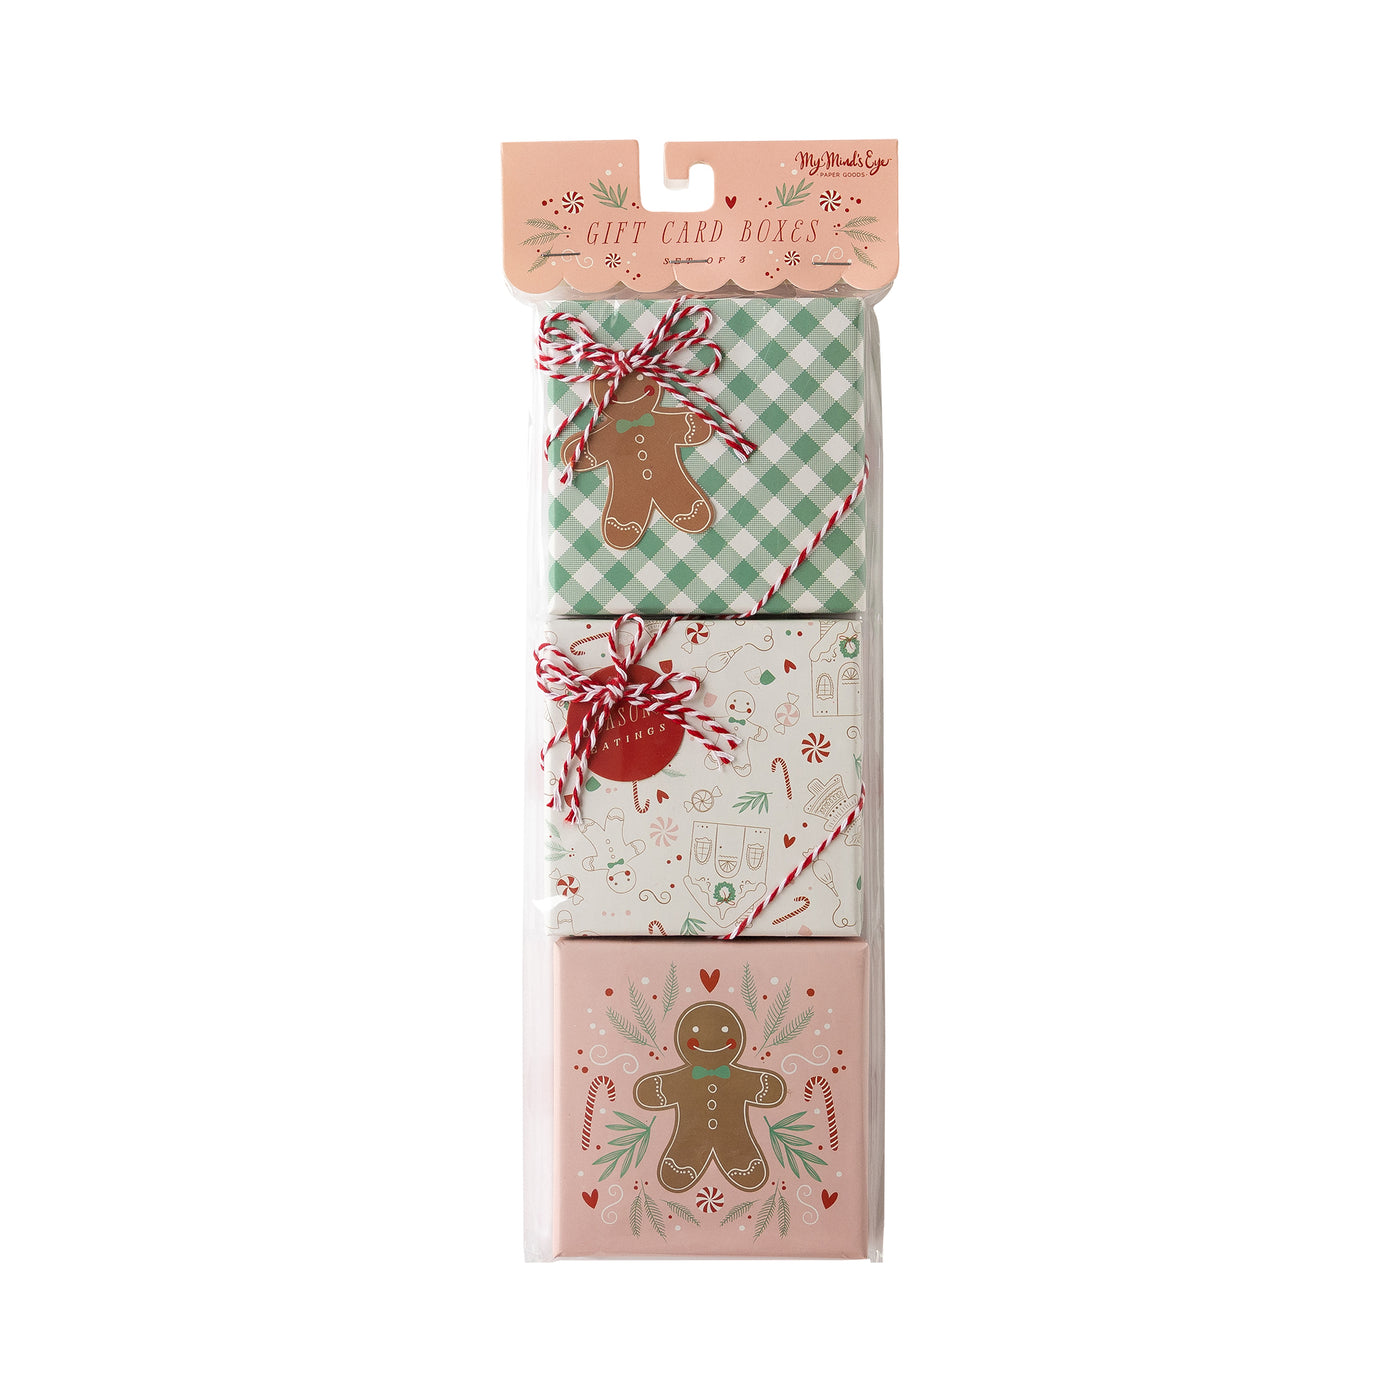 PLGC60 - Classic Gingerbread Gift Card Boxes